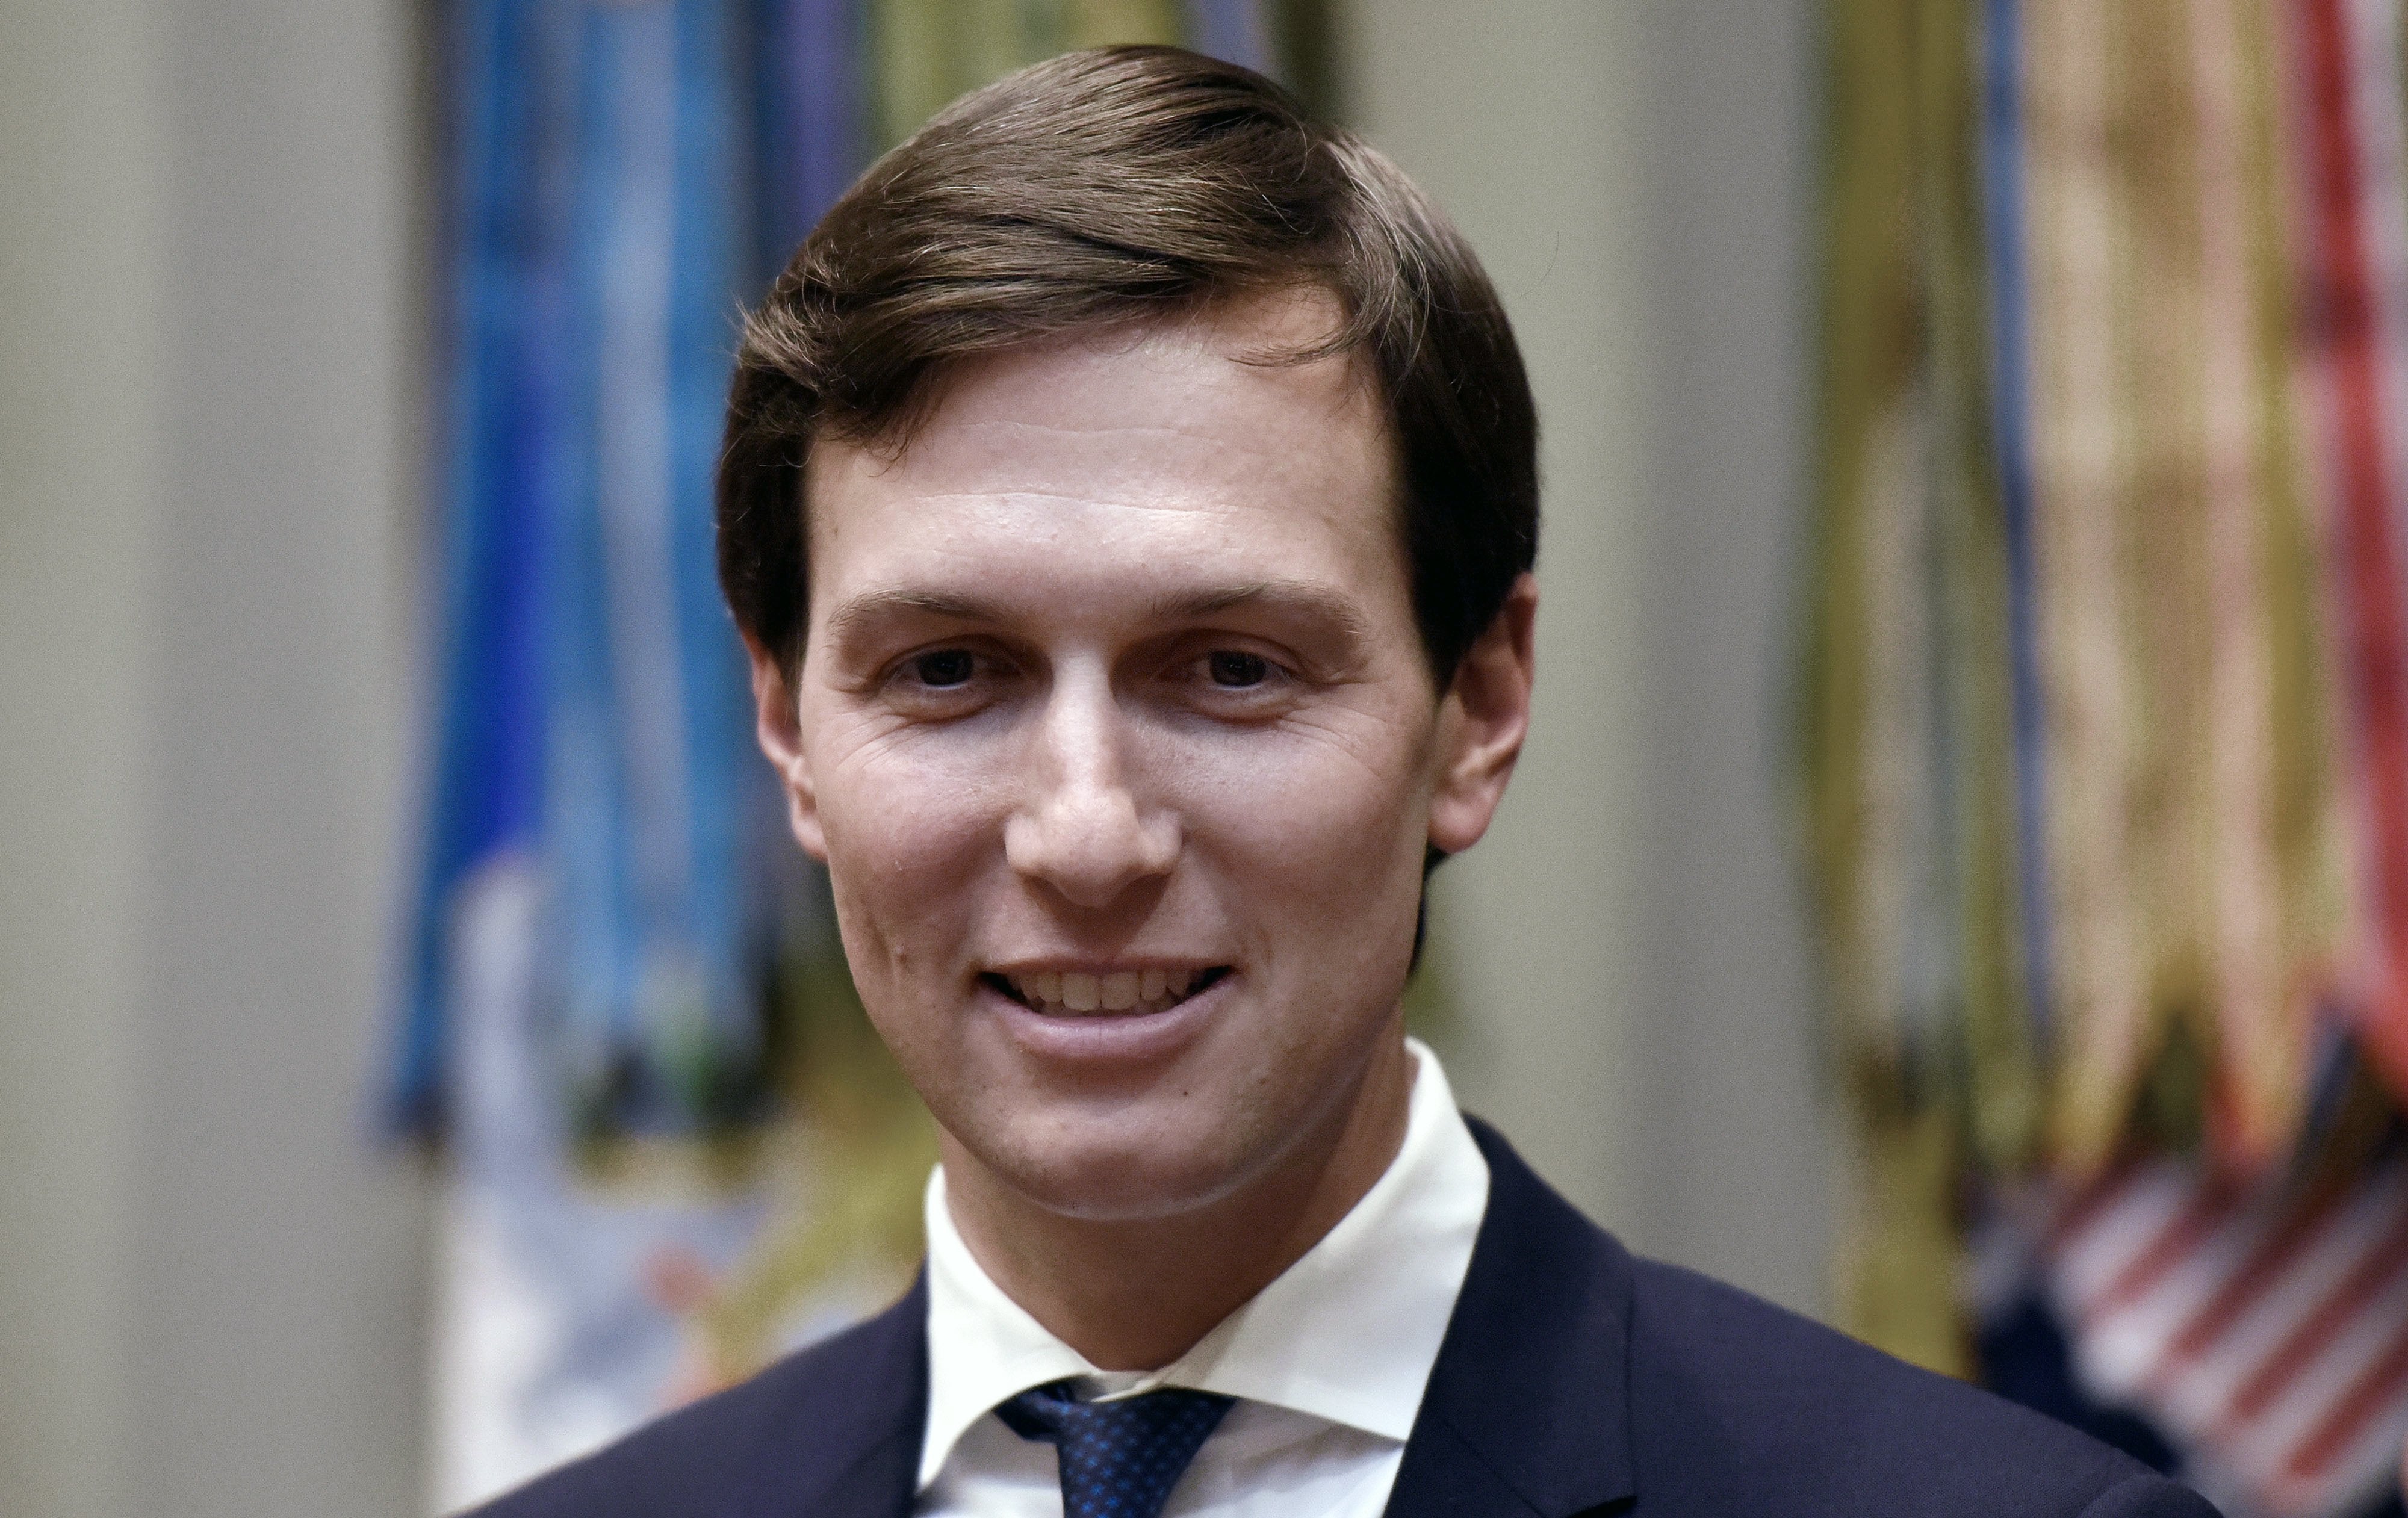 Jared Kushner: I Did Not Collude With Russians At Any Time